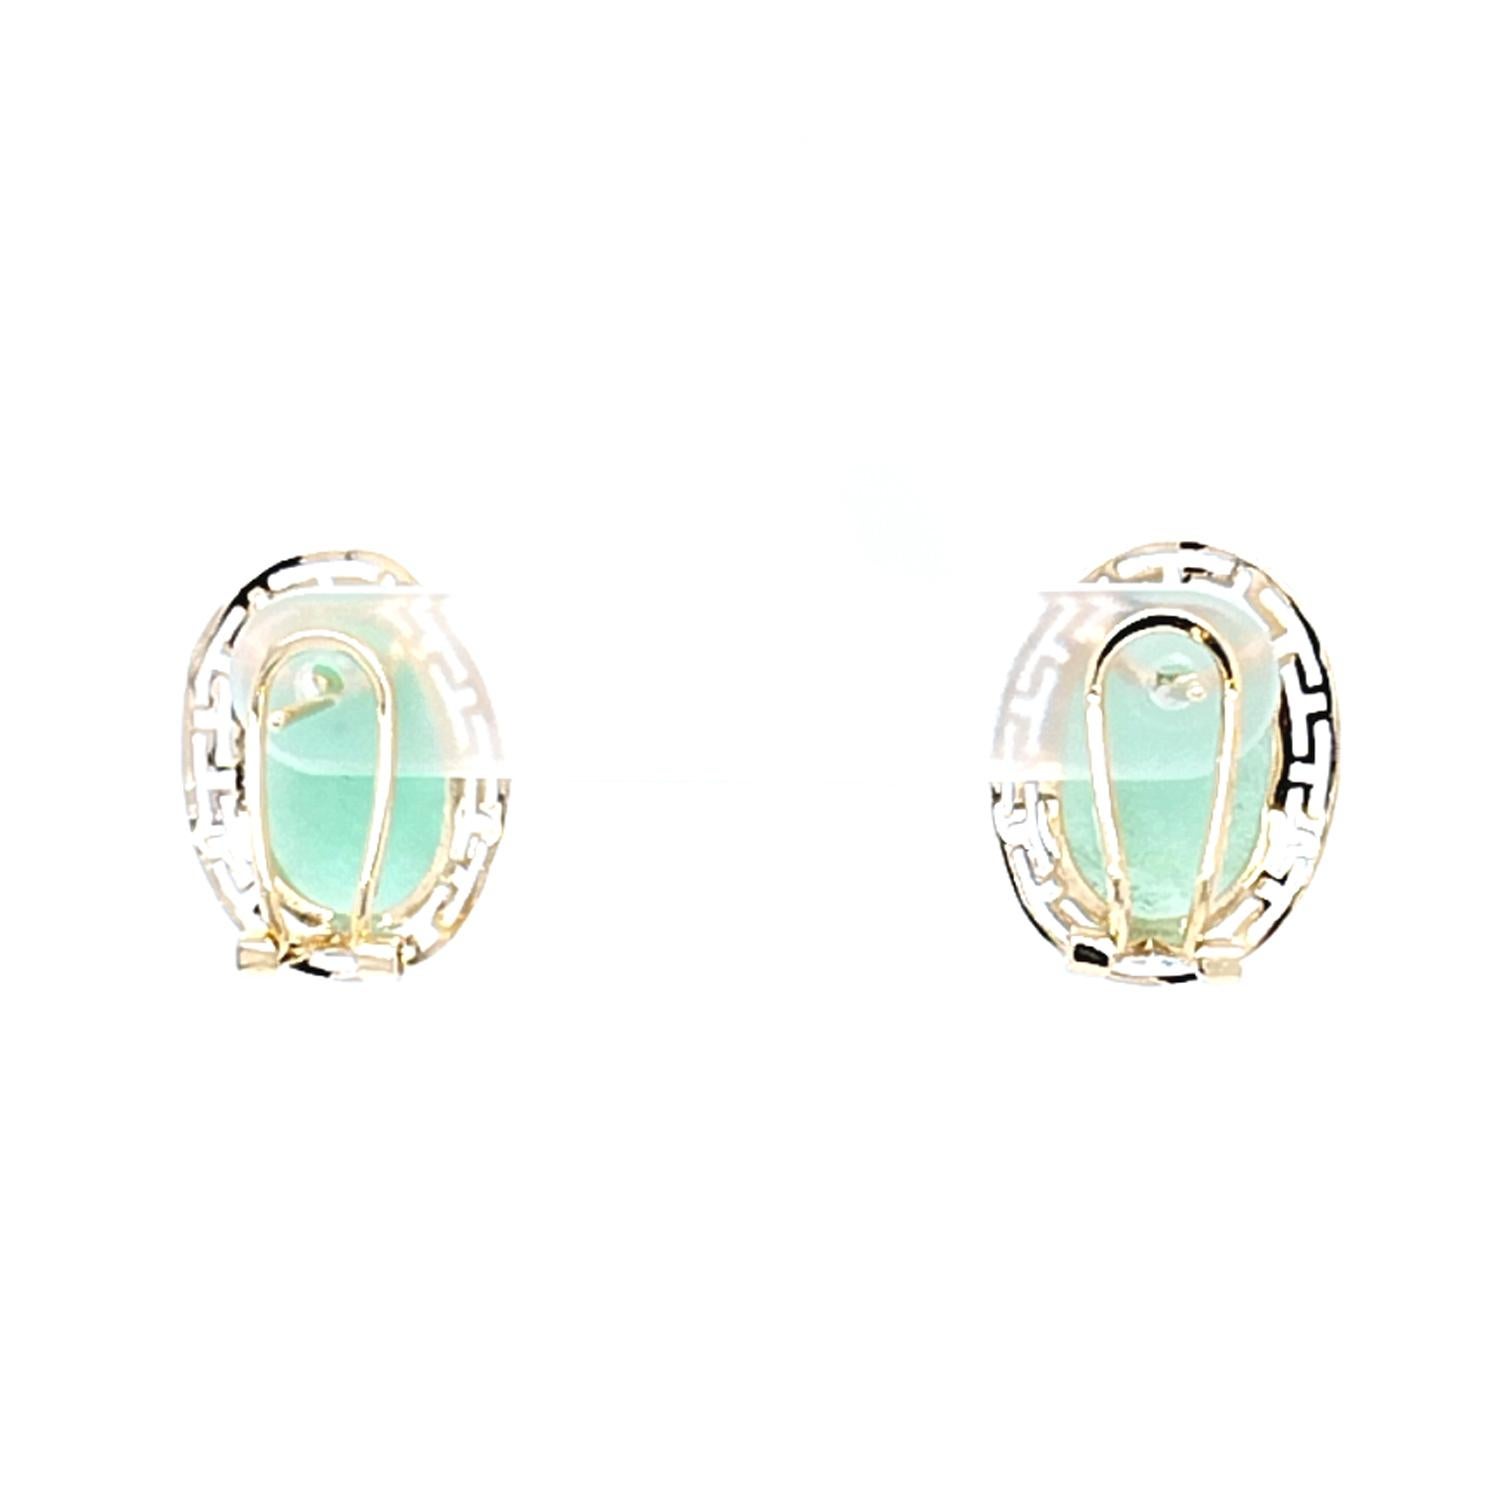 Jade Stud Earrings In Good Condition For Sale In Coral Gables, FL